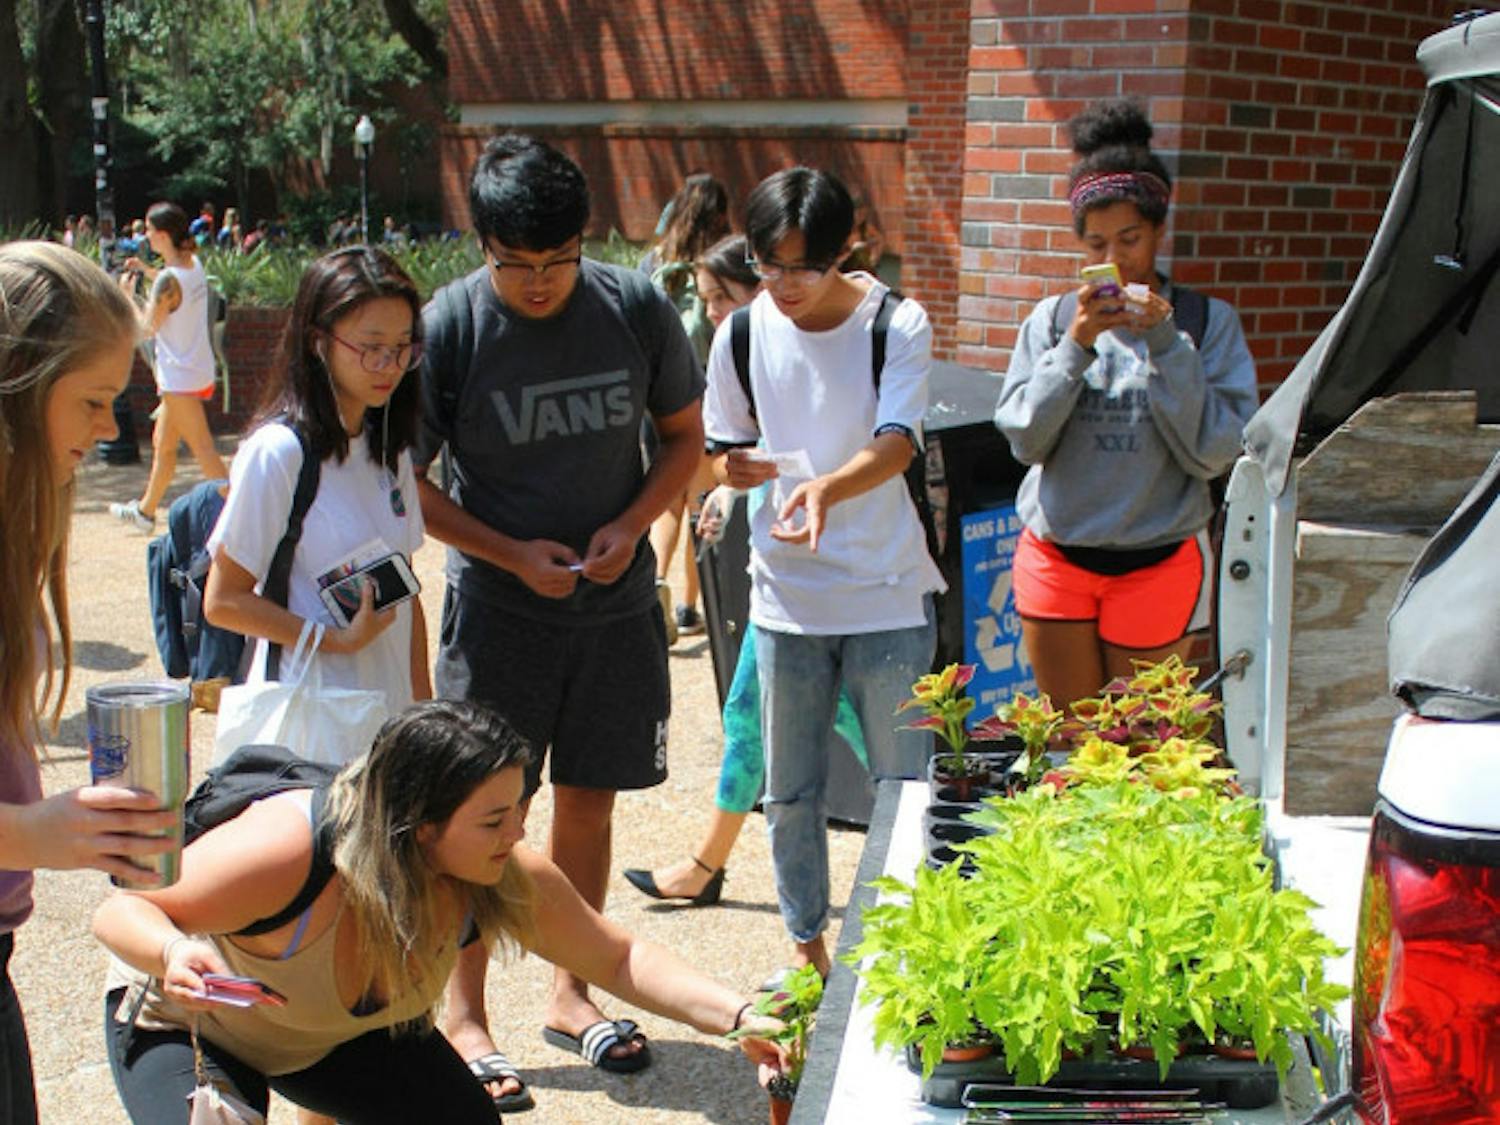 Students pick their coleus plants, donated by the Collegiate Plant Initiative, to take home on Wednesday.